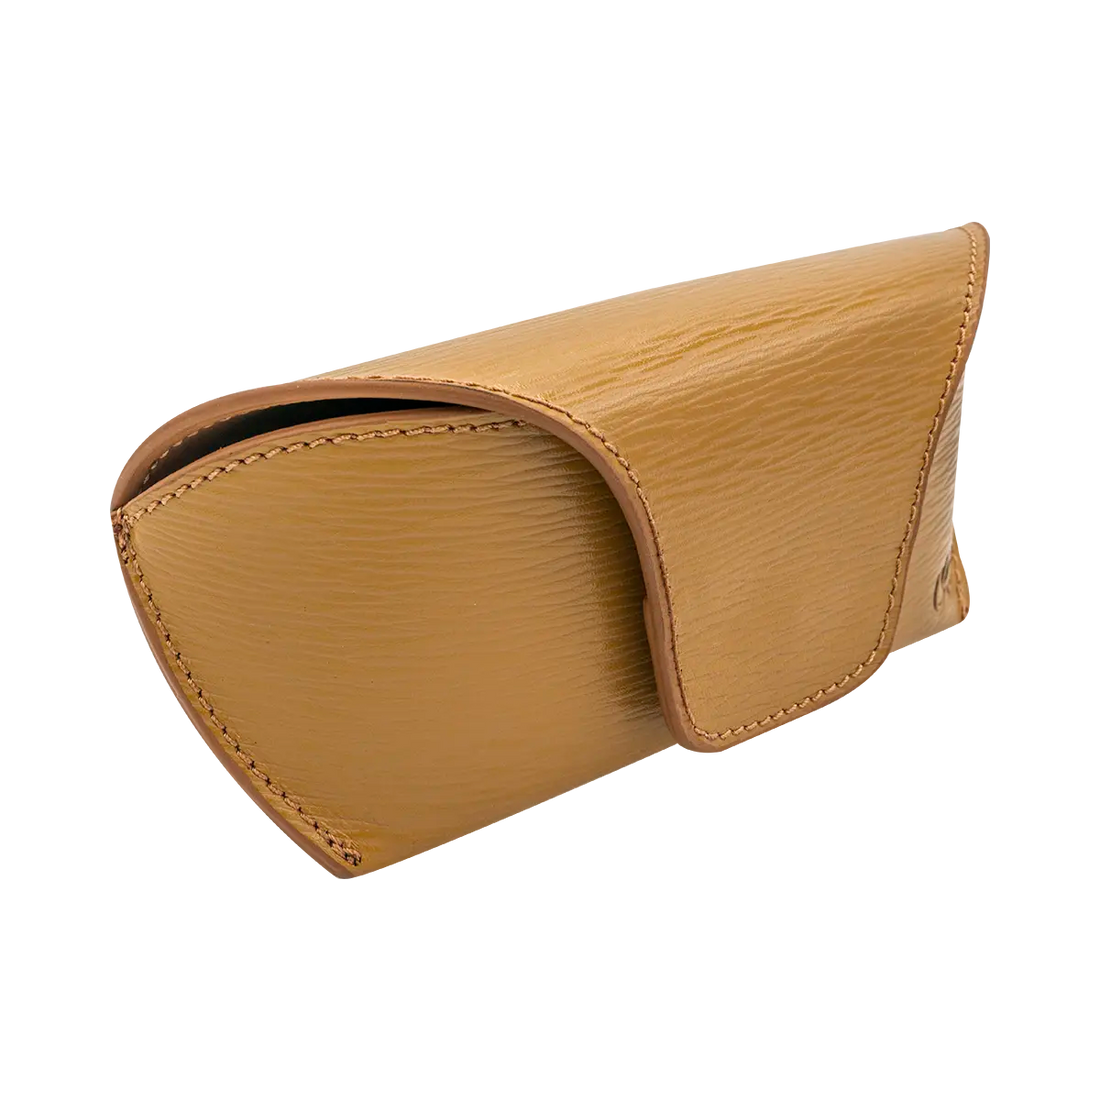 tan leather sunglasses case for women. Shop now in San Diego, CA.